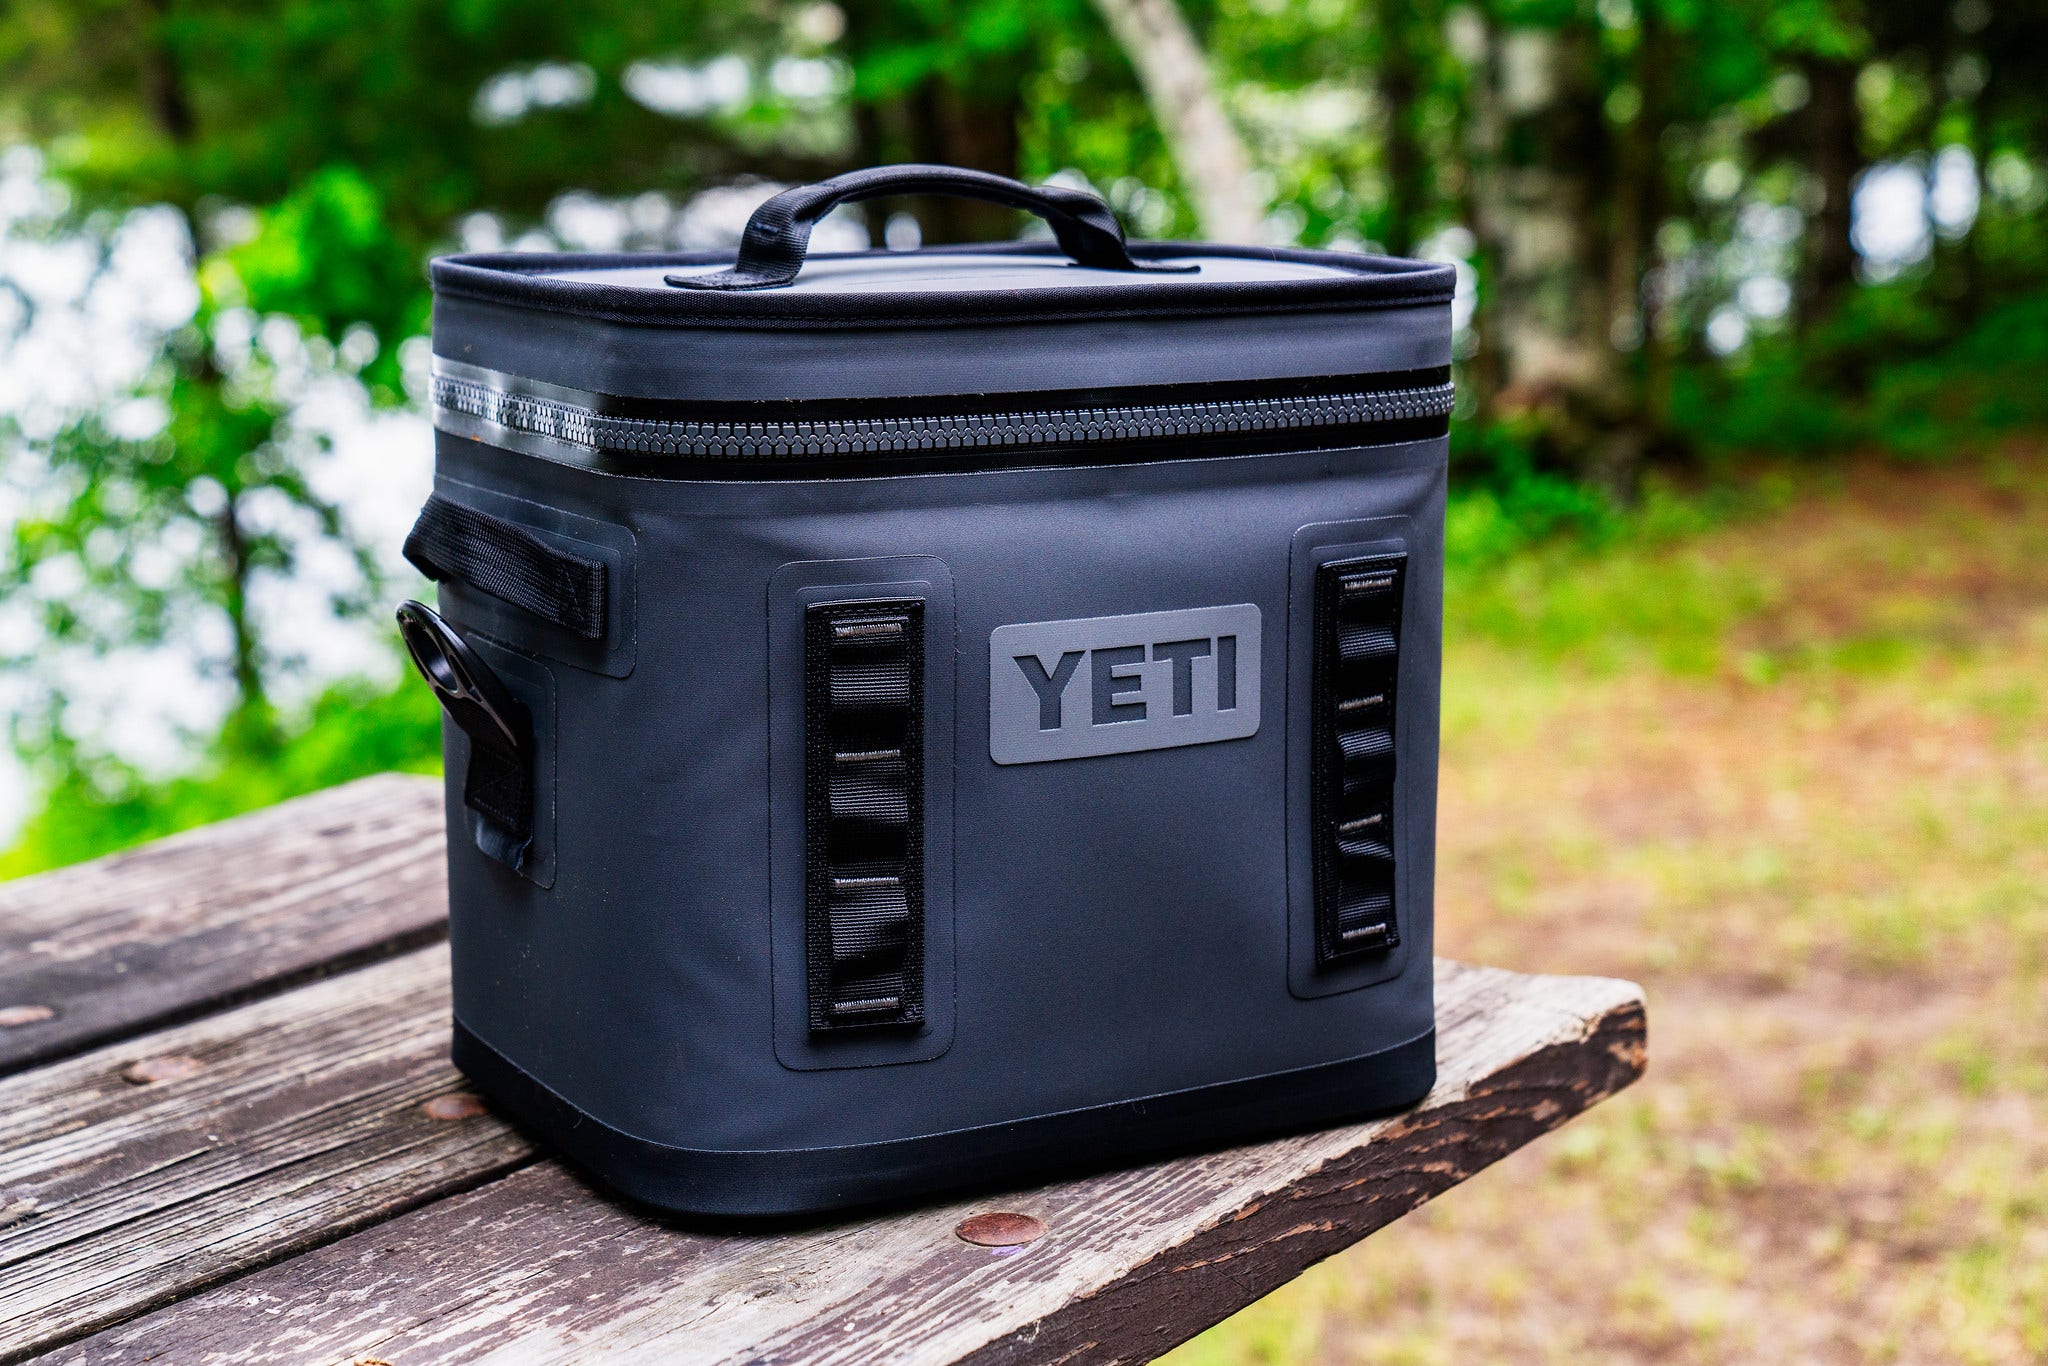 Yeti Files Trademark Application Related To NFTs, Blockchain And The Metaverse: Here's The Name It's Under